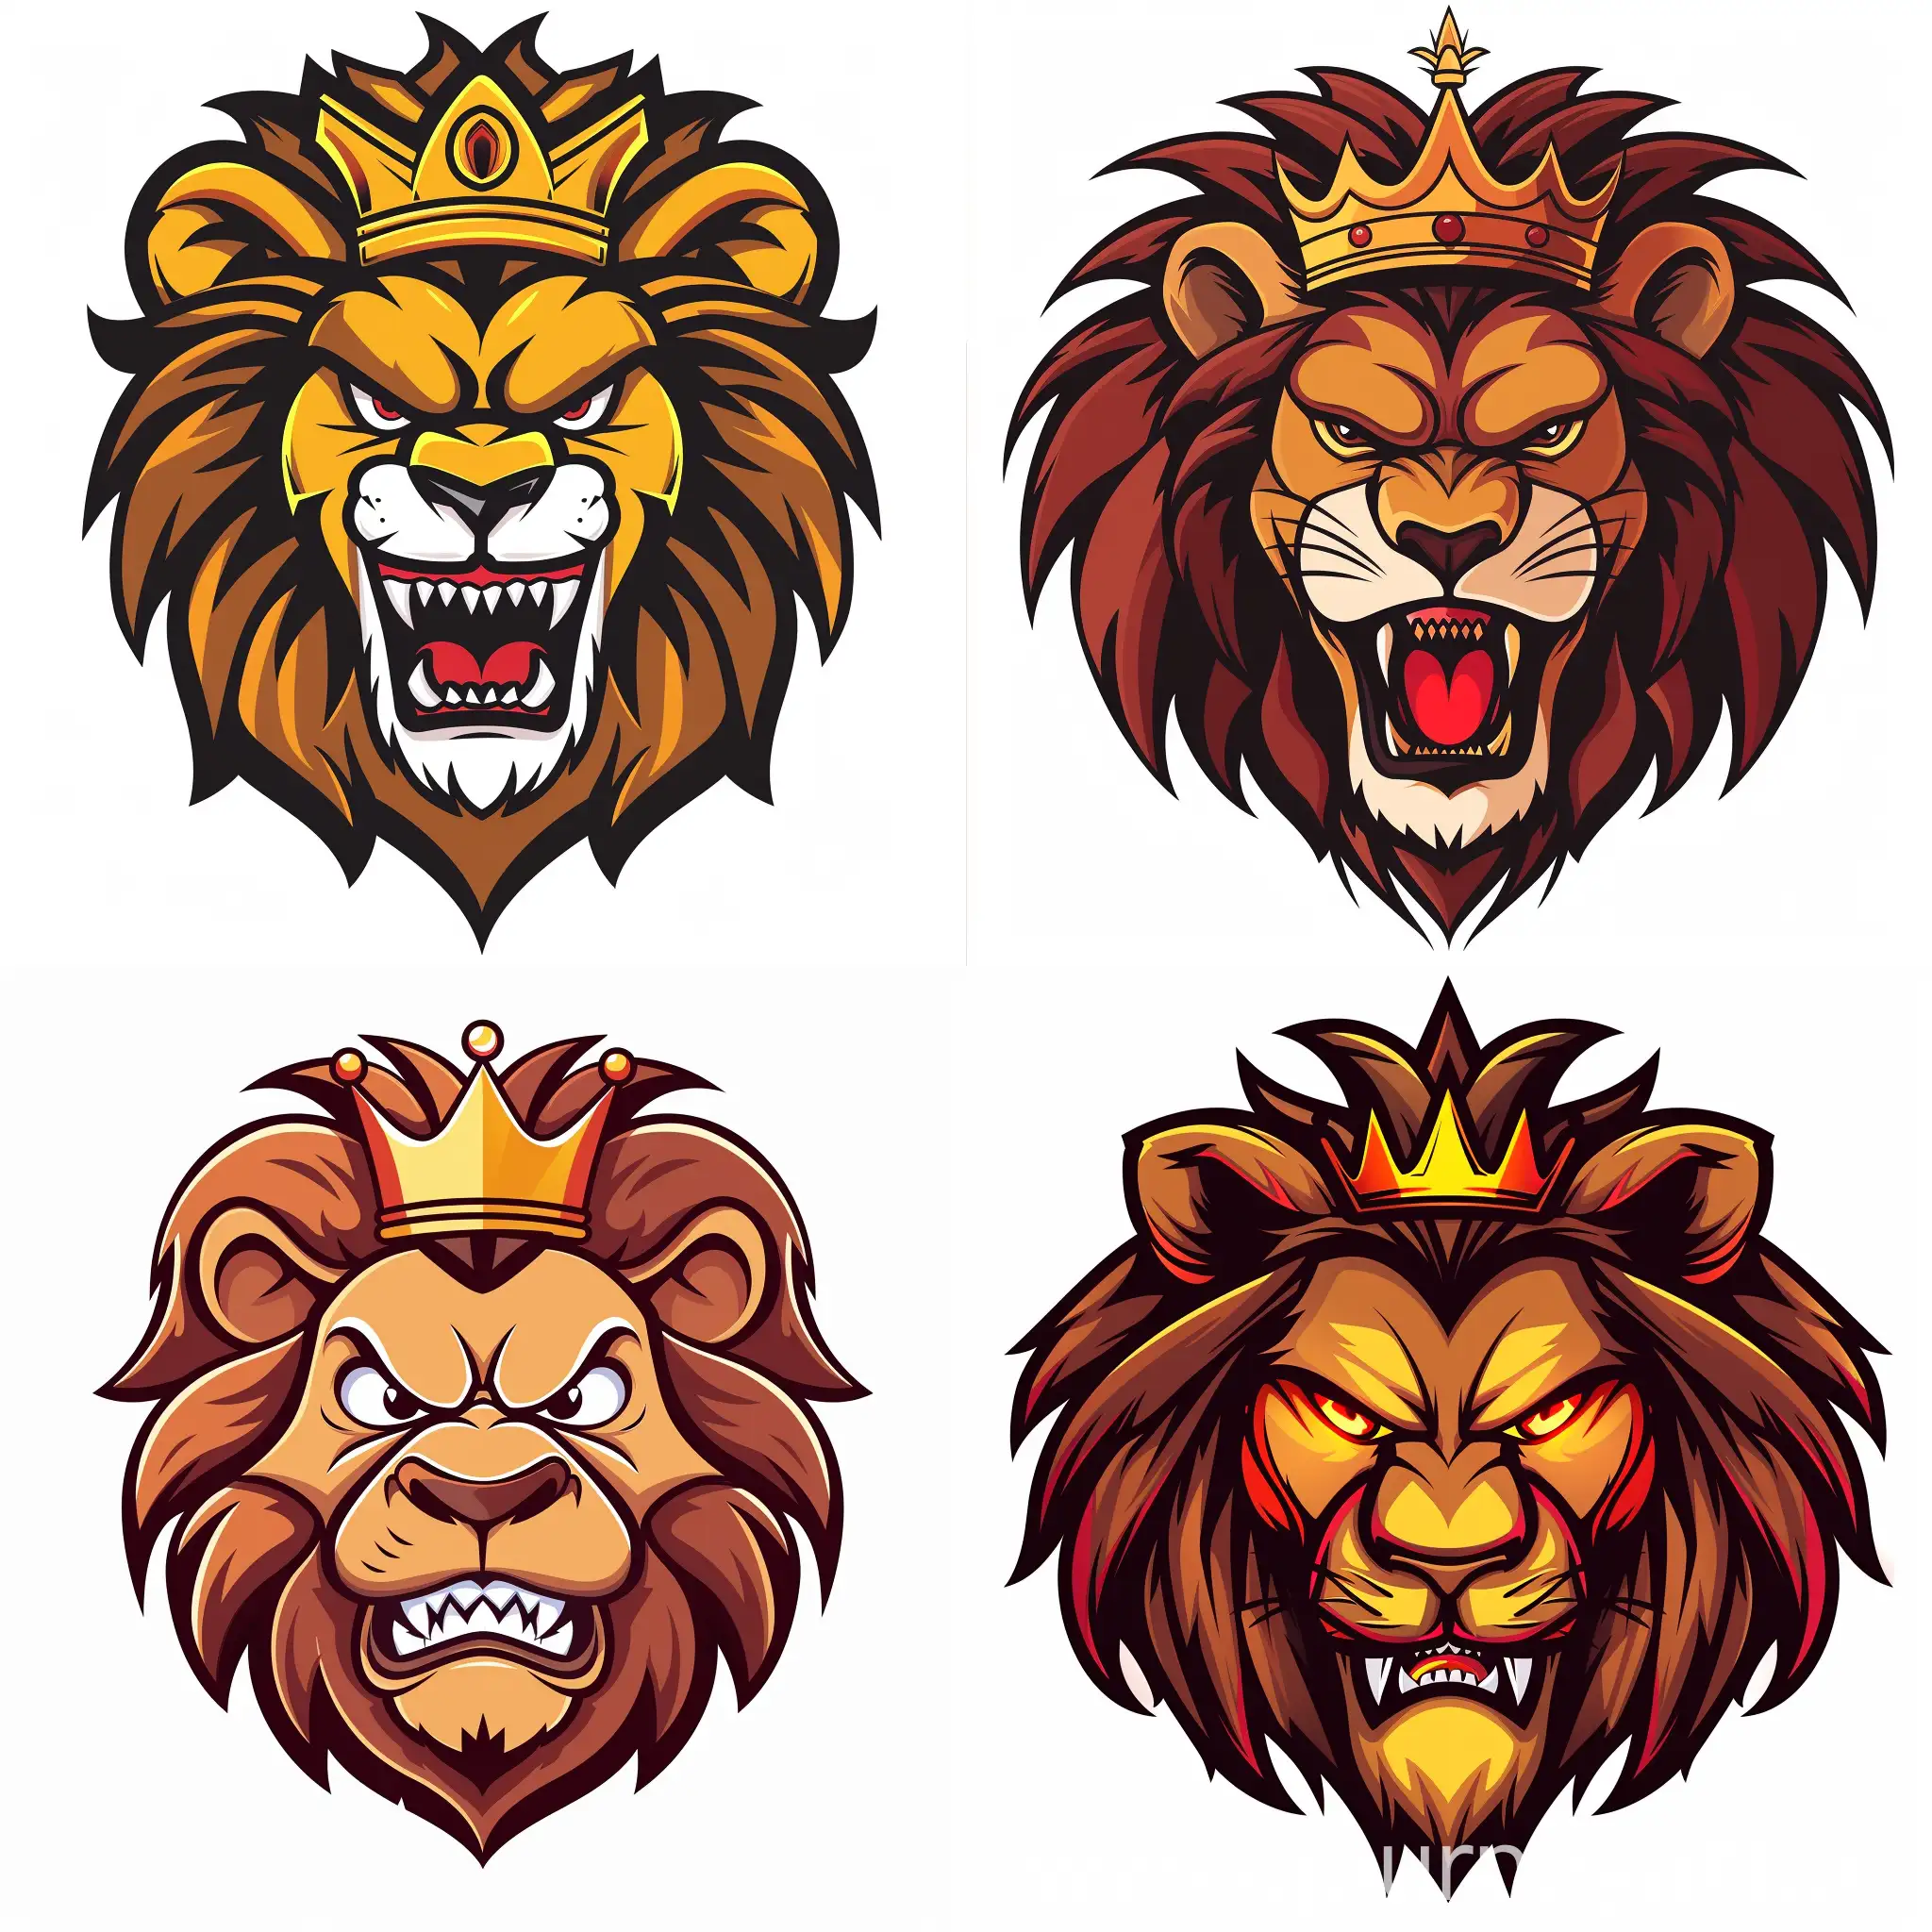 Animal Angry Characters, lion king, with Crown, background white, full face, logo, vector, full color